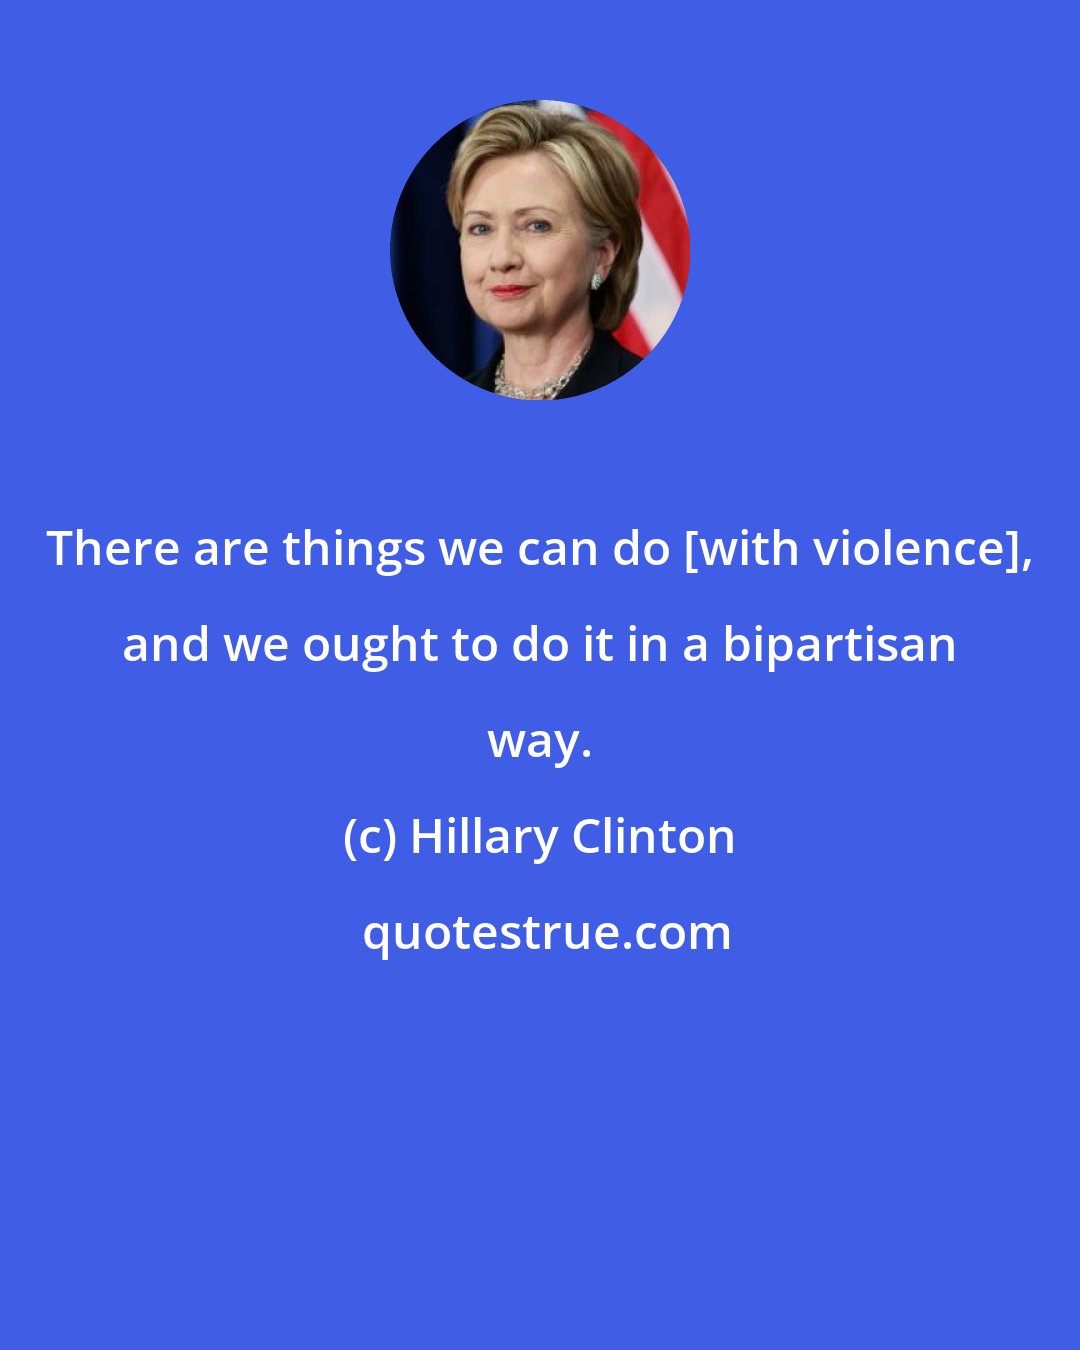 Hillary Clinton: There are things we can do [with violence], and we ought to do it in a bipartisan way.